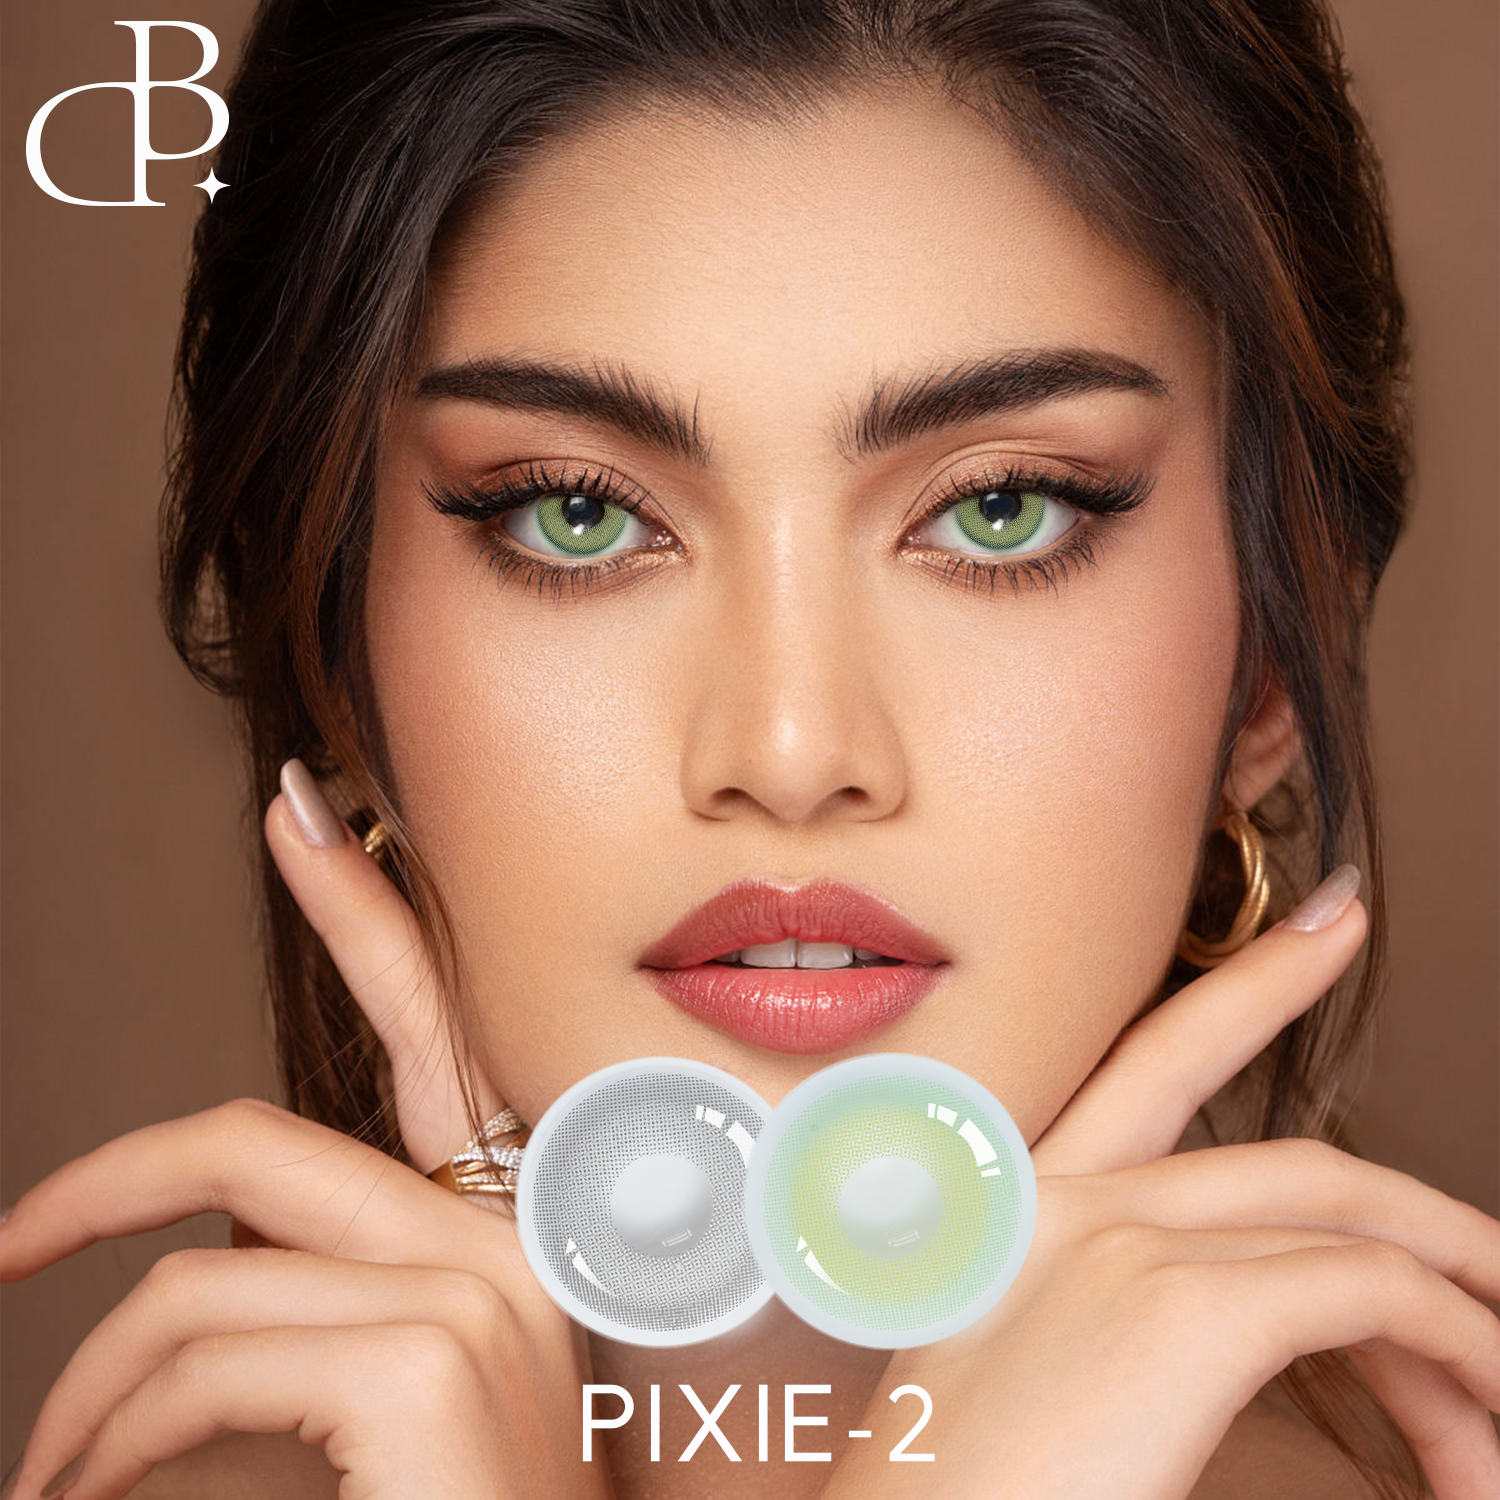 PIXIE-2 15.00mm dbeyes lens Brand Wholesale 9 Month Cosmetic Contact Lens Chinese Supplier Prescription Nā Lens Contact Colored No nā Maka Brown